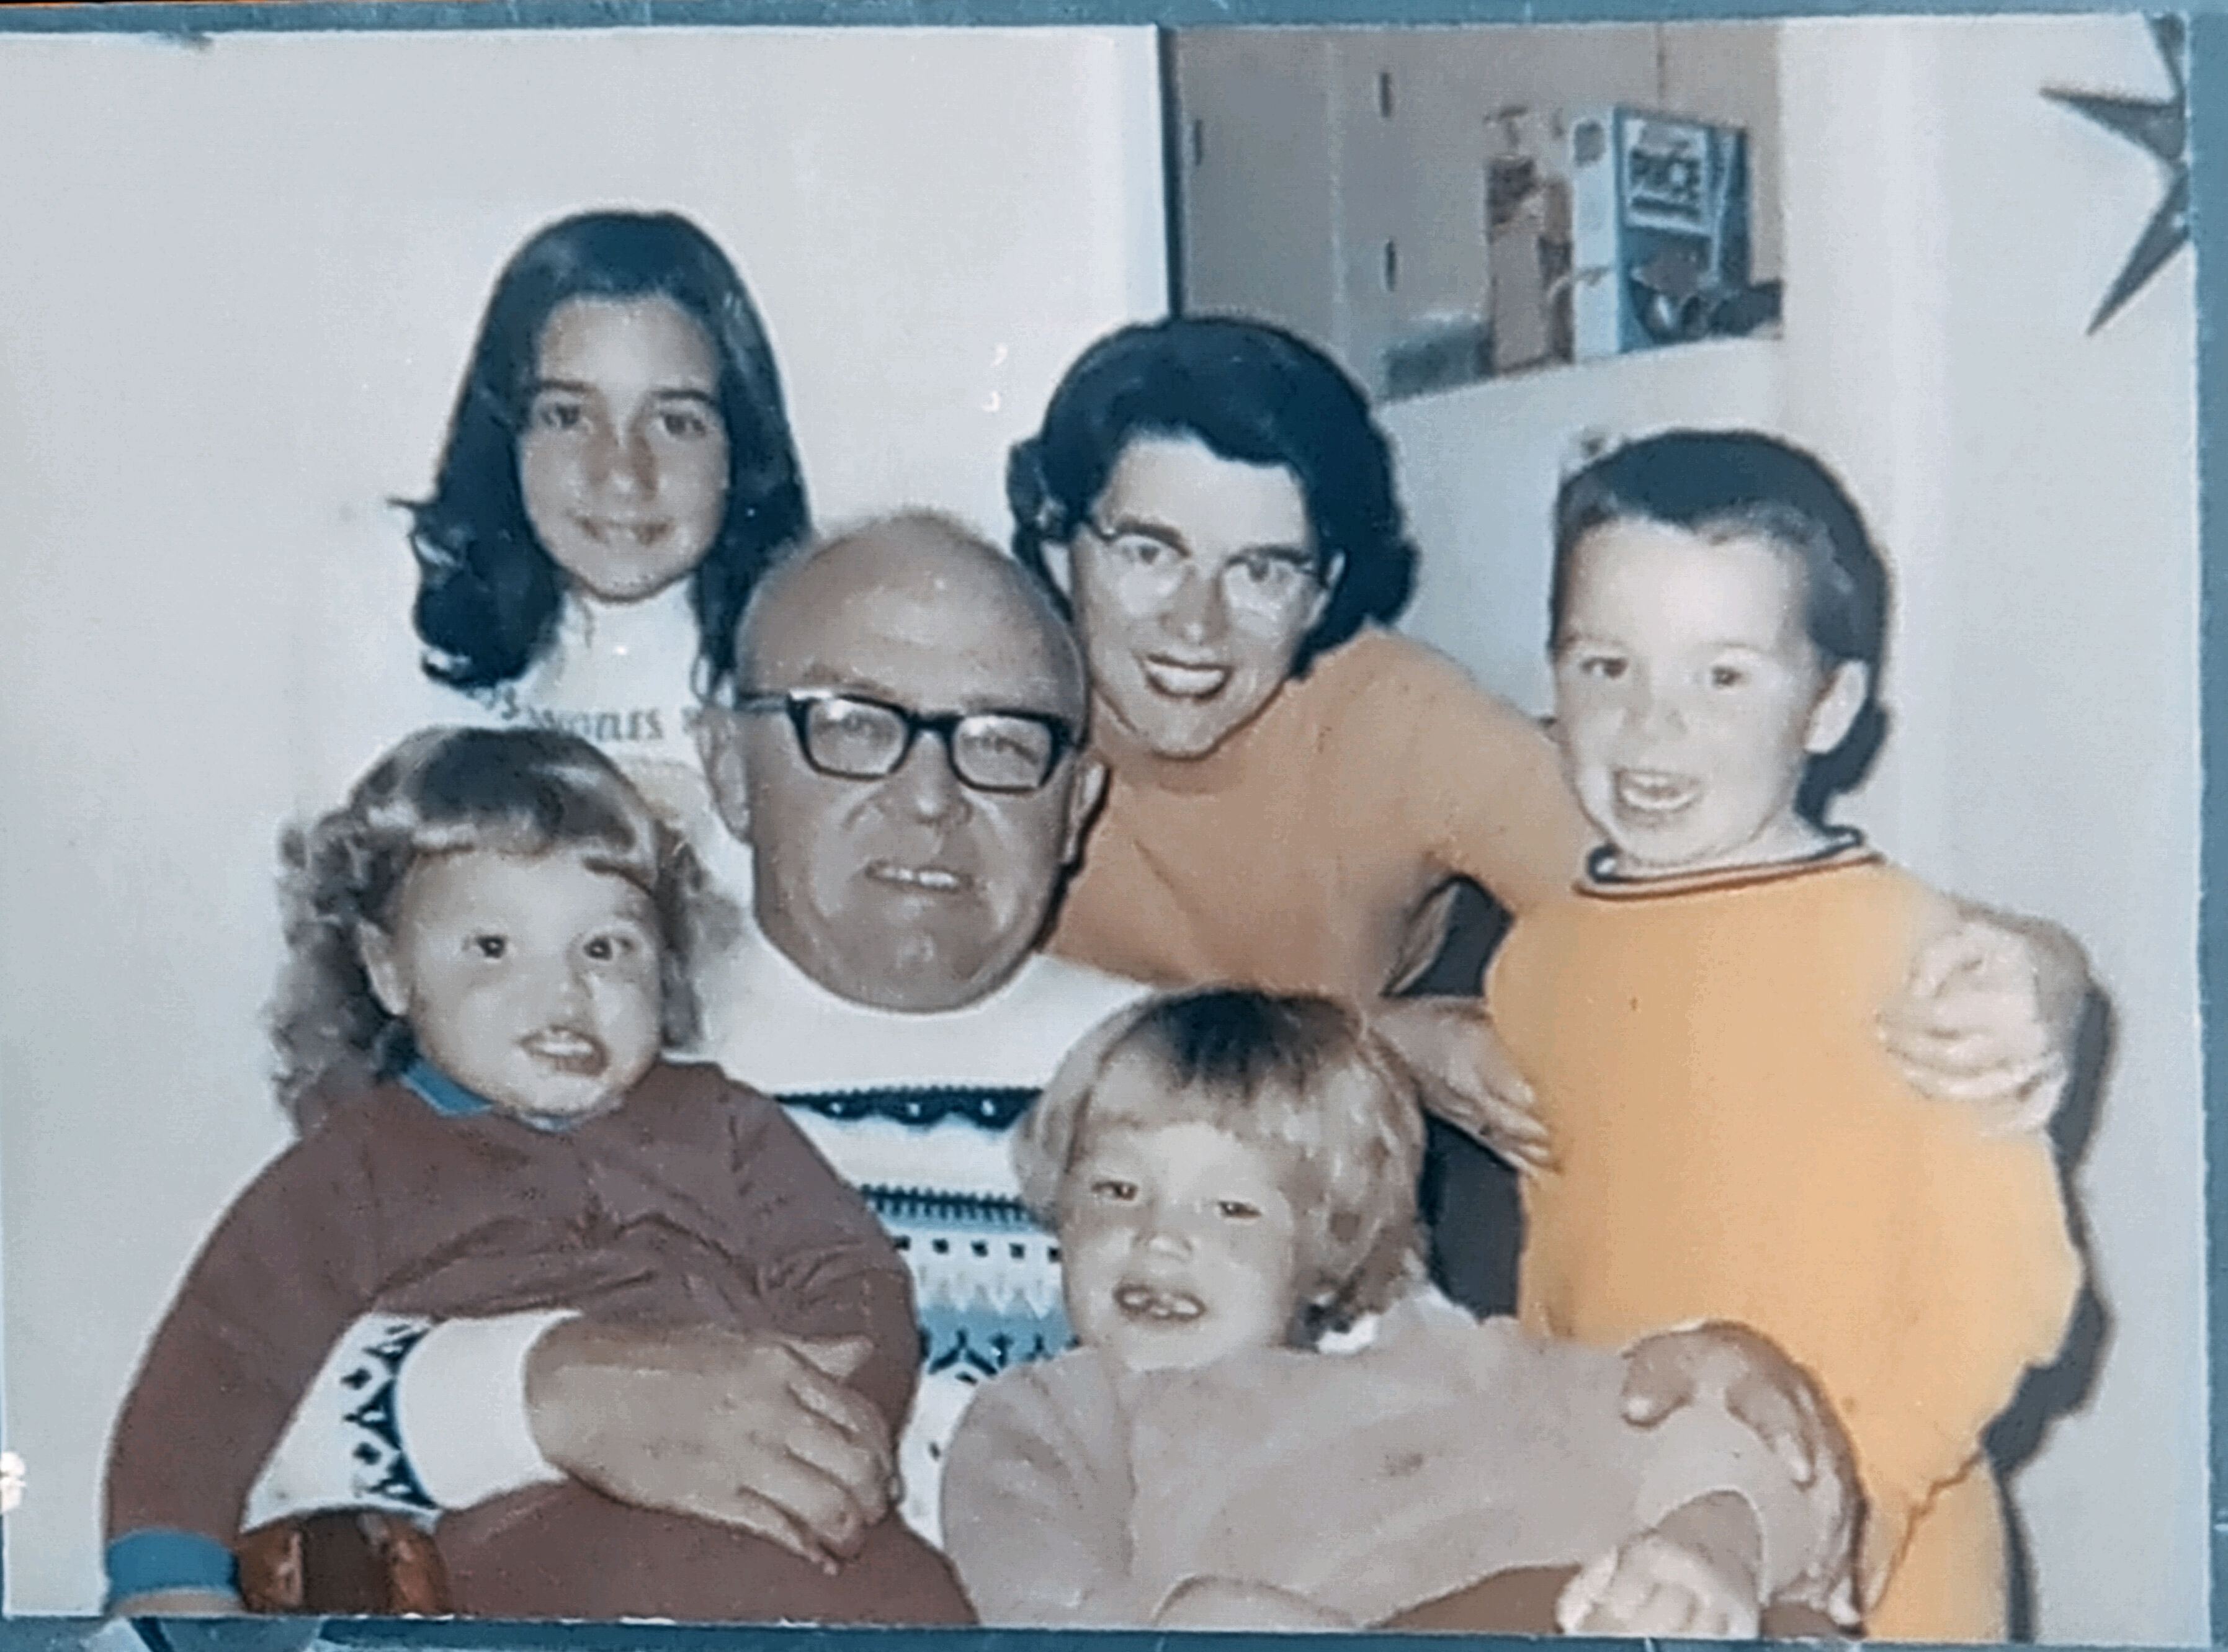 My parents, brother and sisters. We lived in Farmington, New Mexico. This was taken in 1970.